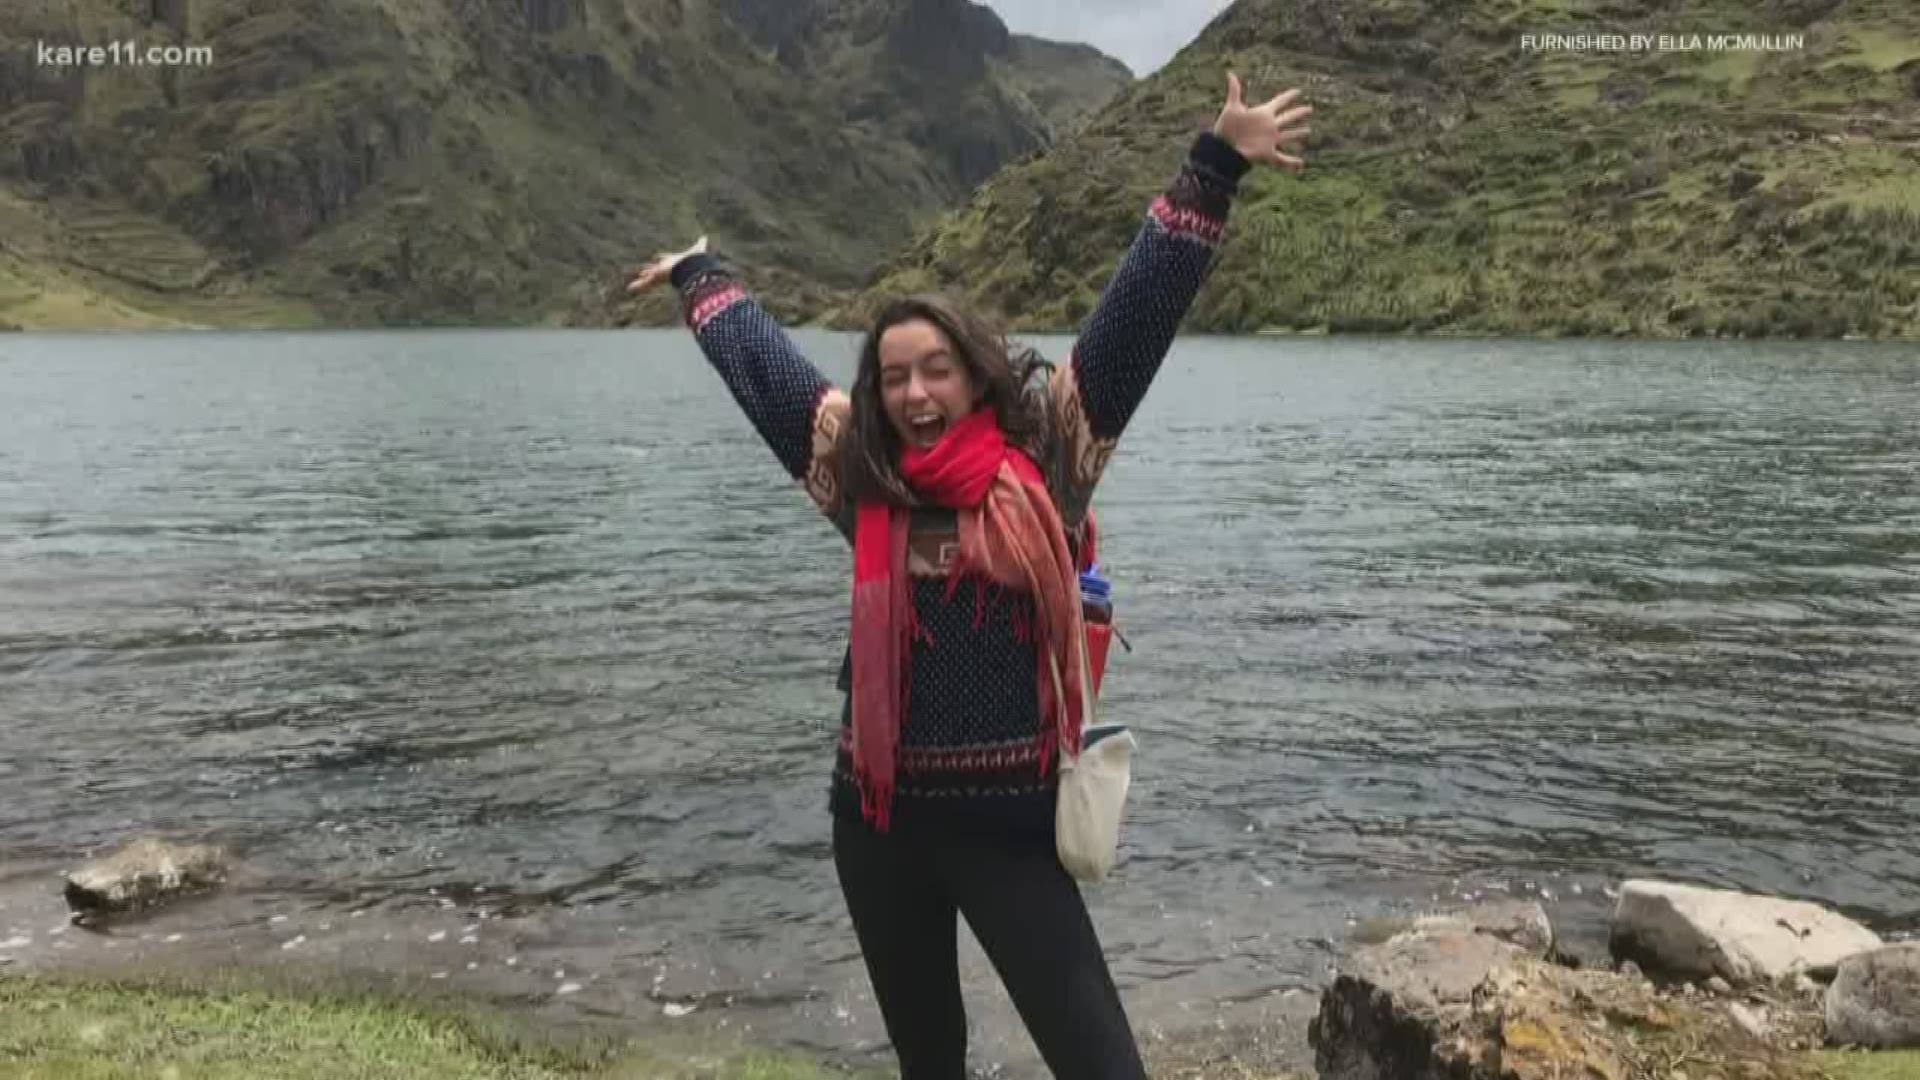 We spoke with a Minnesota woman about her story after getting stuck in Peru during her study abroad program.